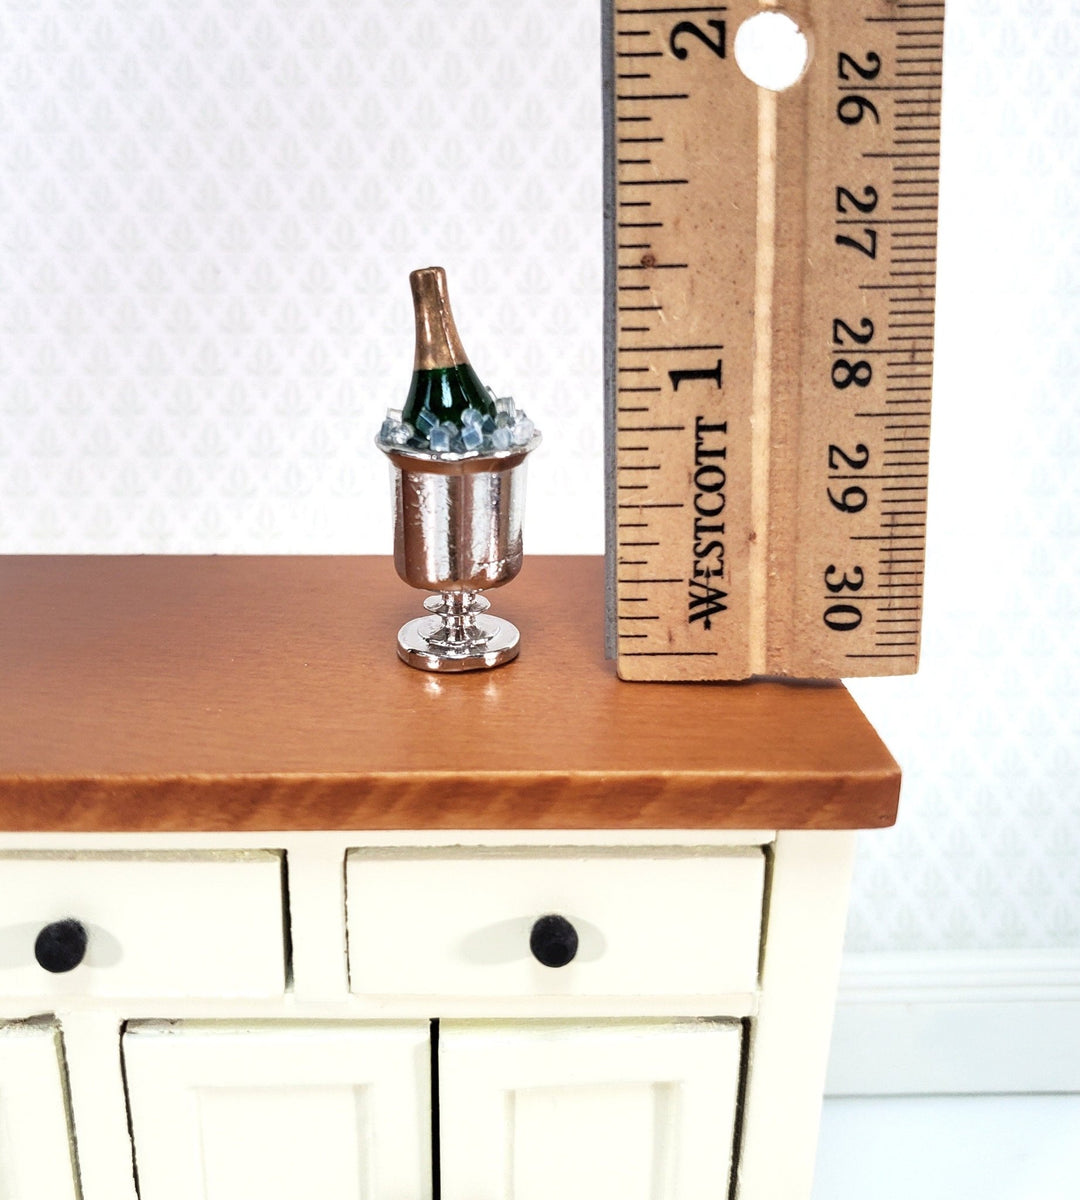 Dollhouse Champagne on Ice in Chilling Bucket 1:12 Scale Miniature Drinks - Miniature Crush